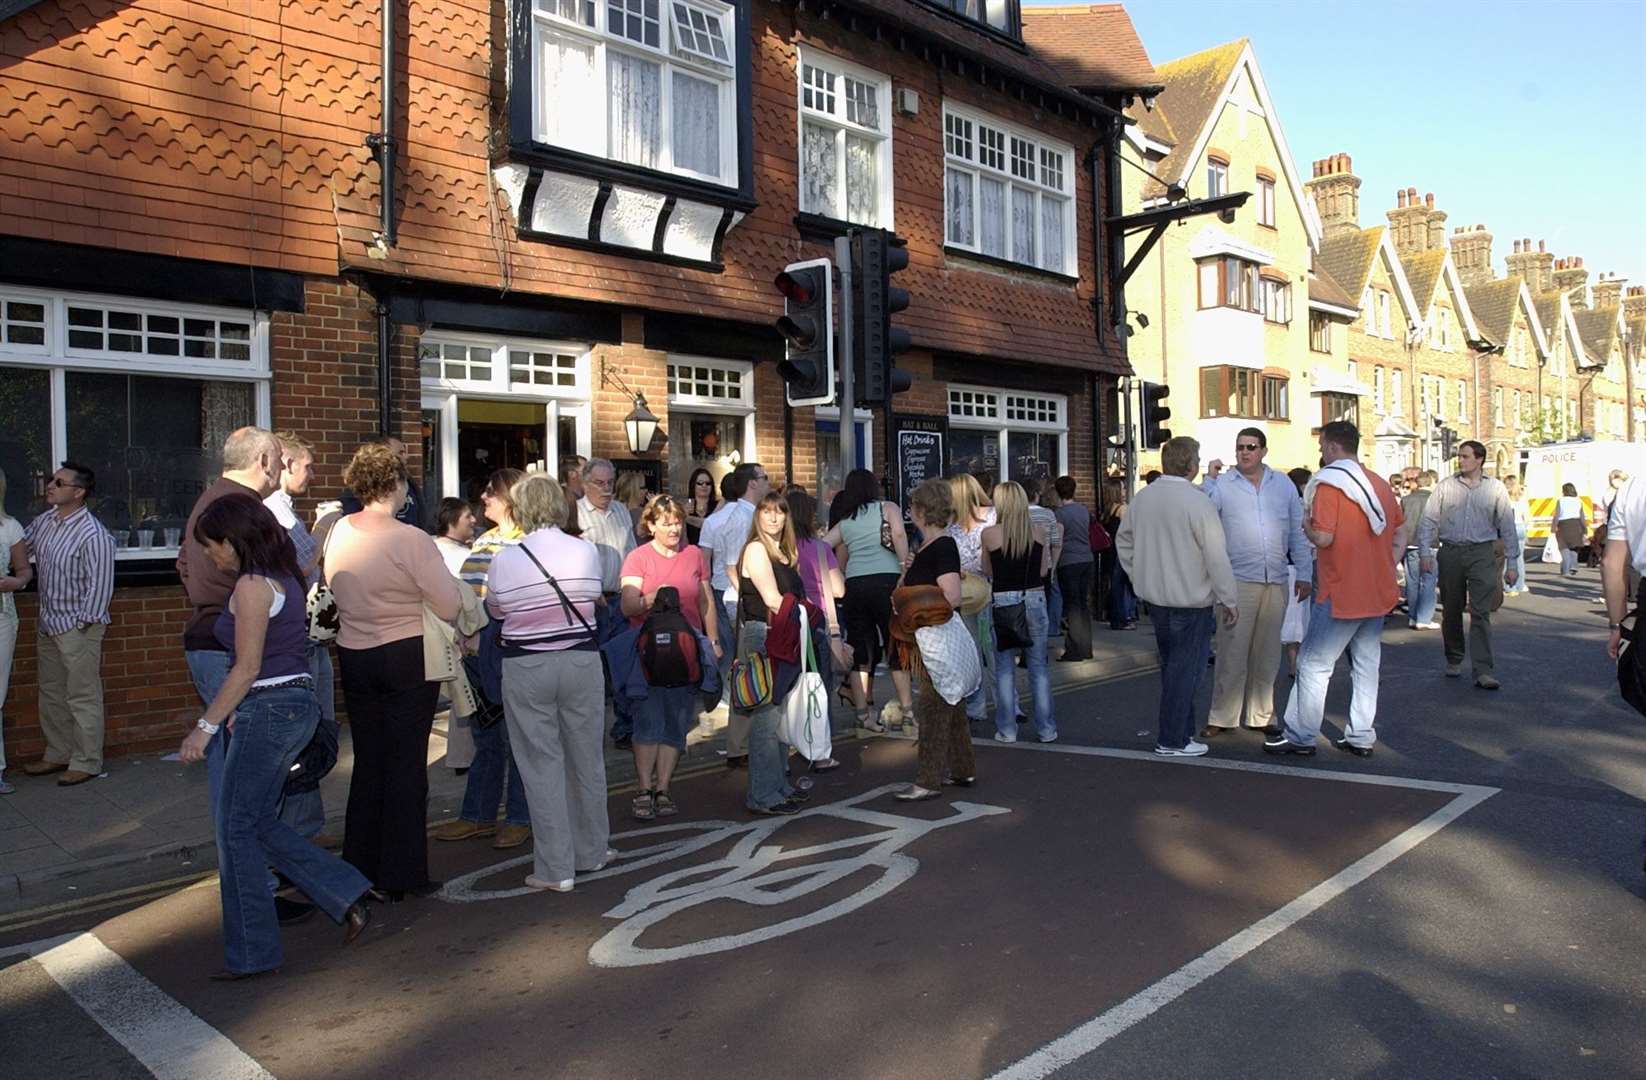 The Bat and Ball pub did a roaring trade as Elton John perform at the St Lawrence cricket ground opposite in June 2006. The Canterbury pub closed in 2017 and was turned into L'hote restaurant